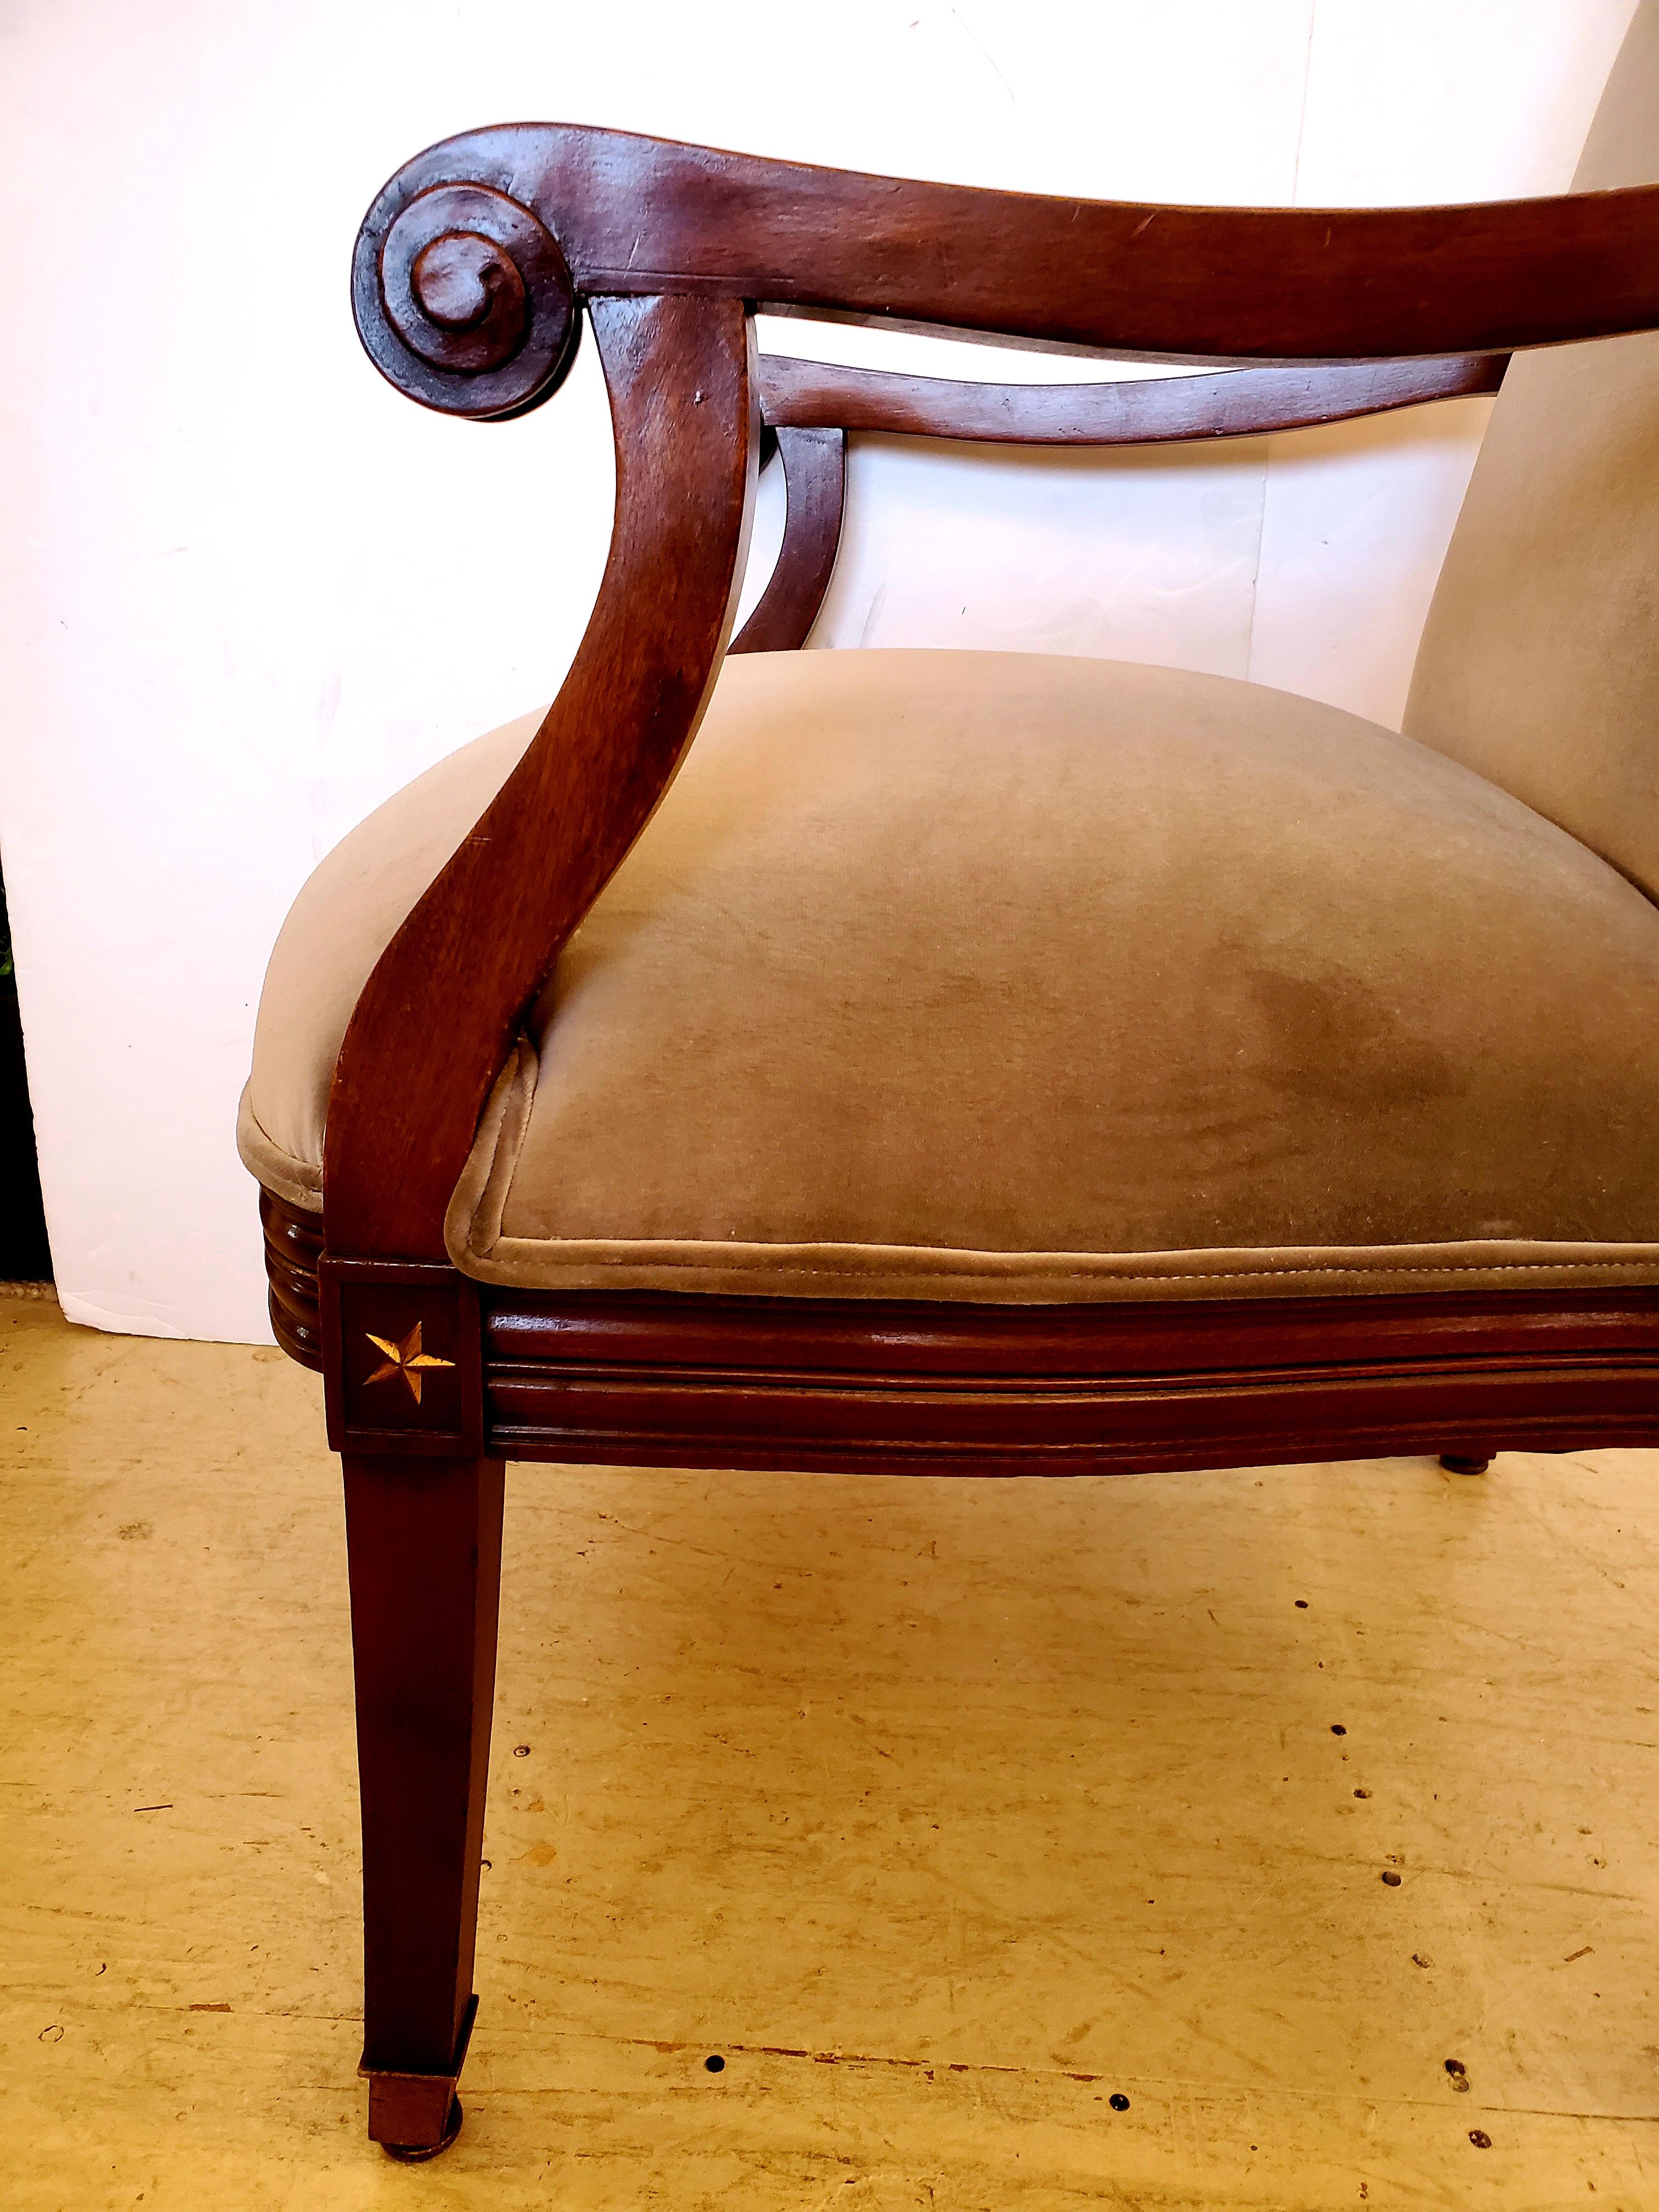 Elegant 19th Century Mahogany Neoclassical Regency Style Arm Chair with Stars For Sale 9